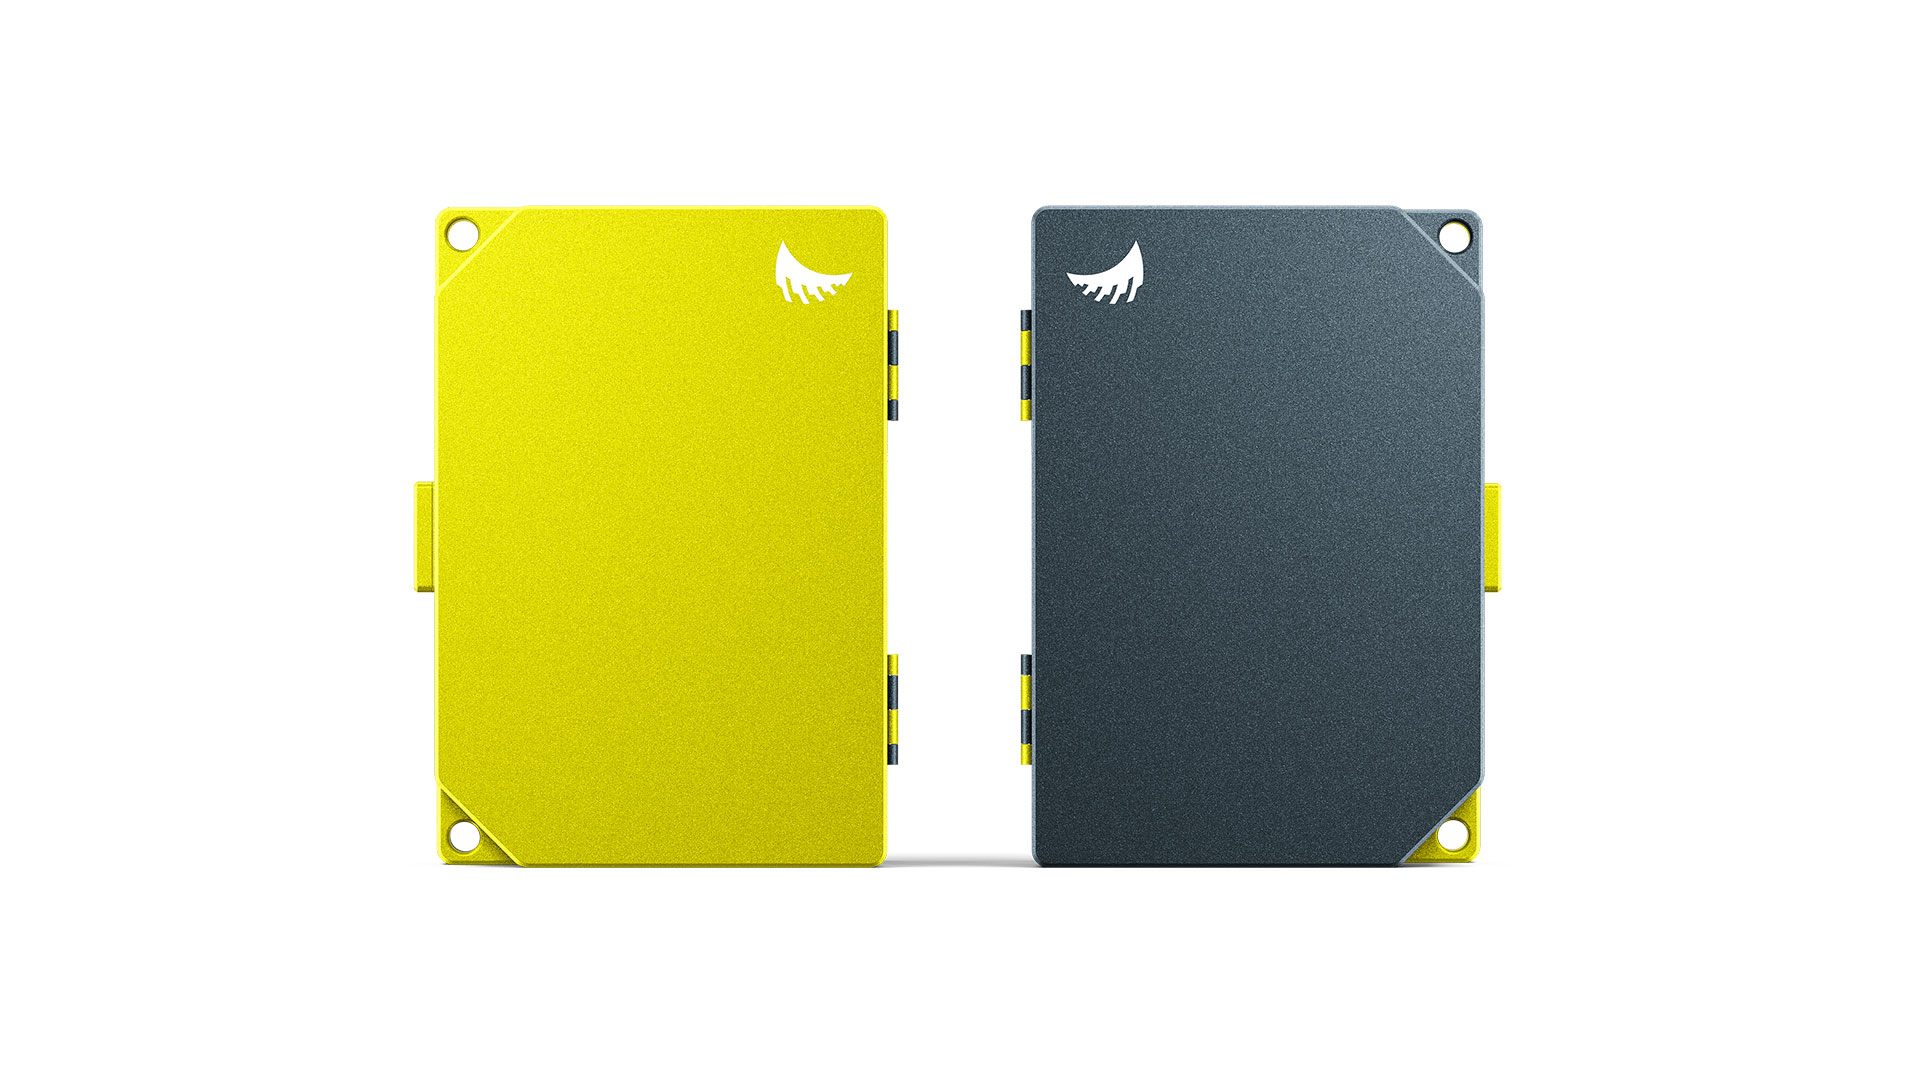 Angelbird Media Tank Launched - Robust Case for SD, CFast and